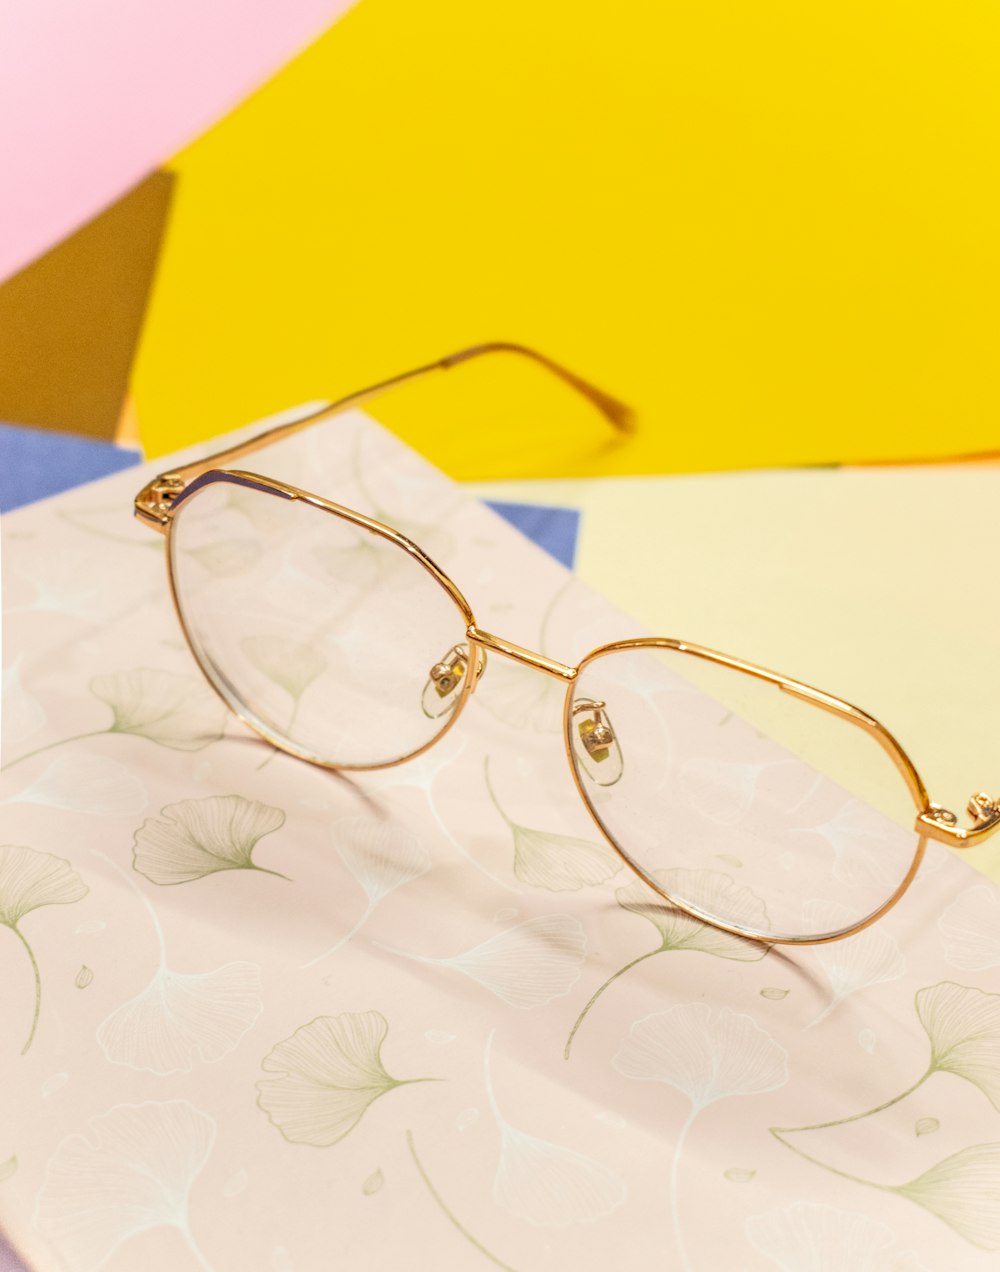 a pair of glasses sitting on top of a piece of paper